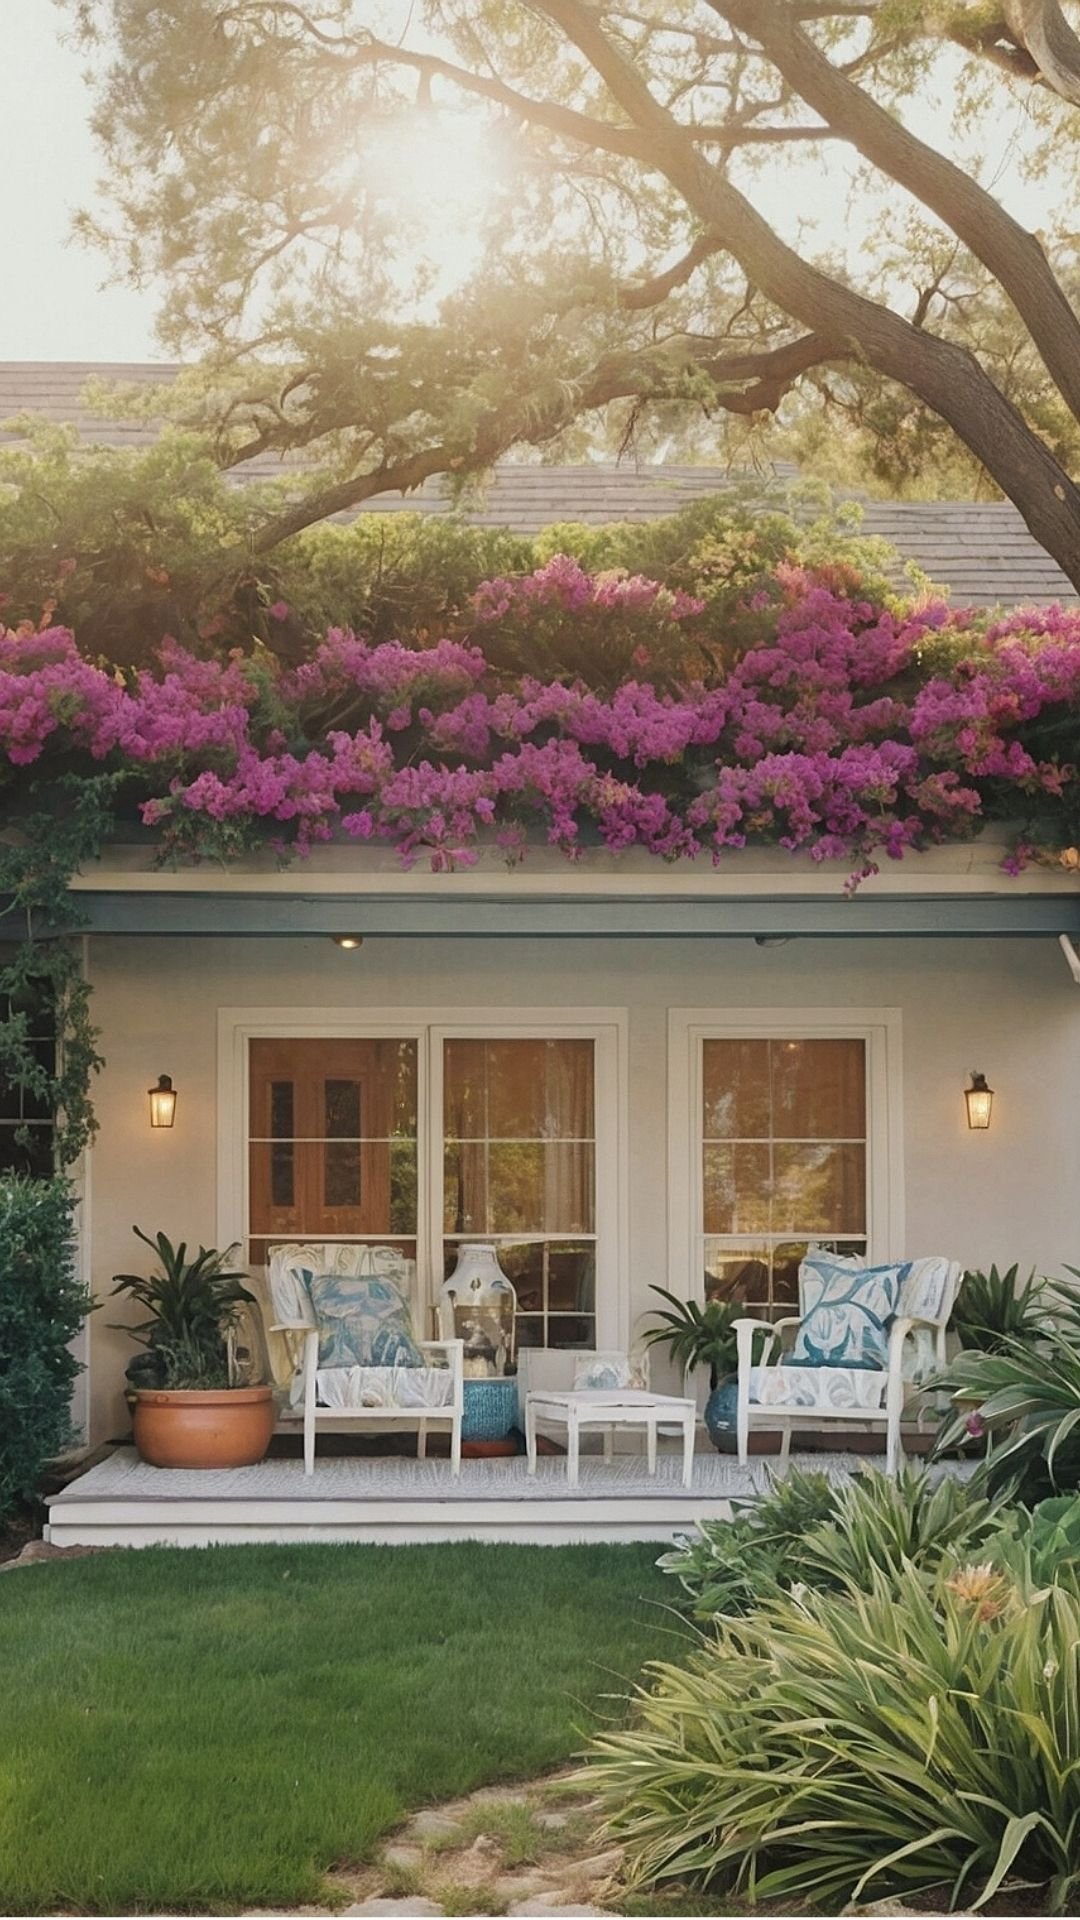 Cozy Patio Retreat with Lush Pink Bougainvillea Canopy